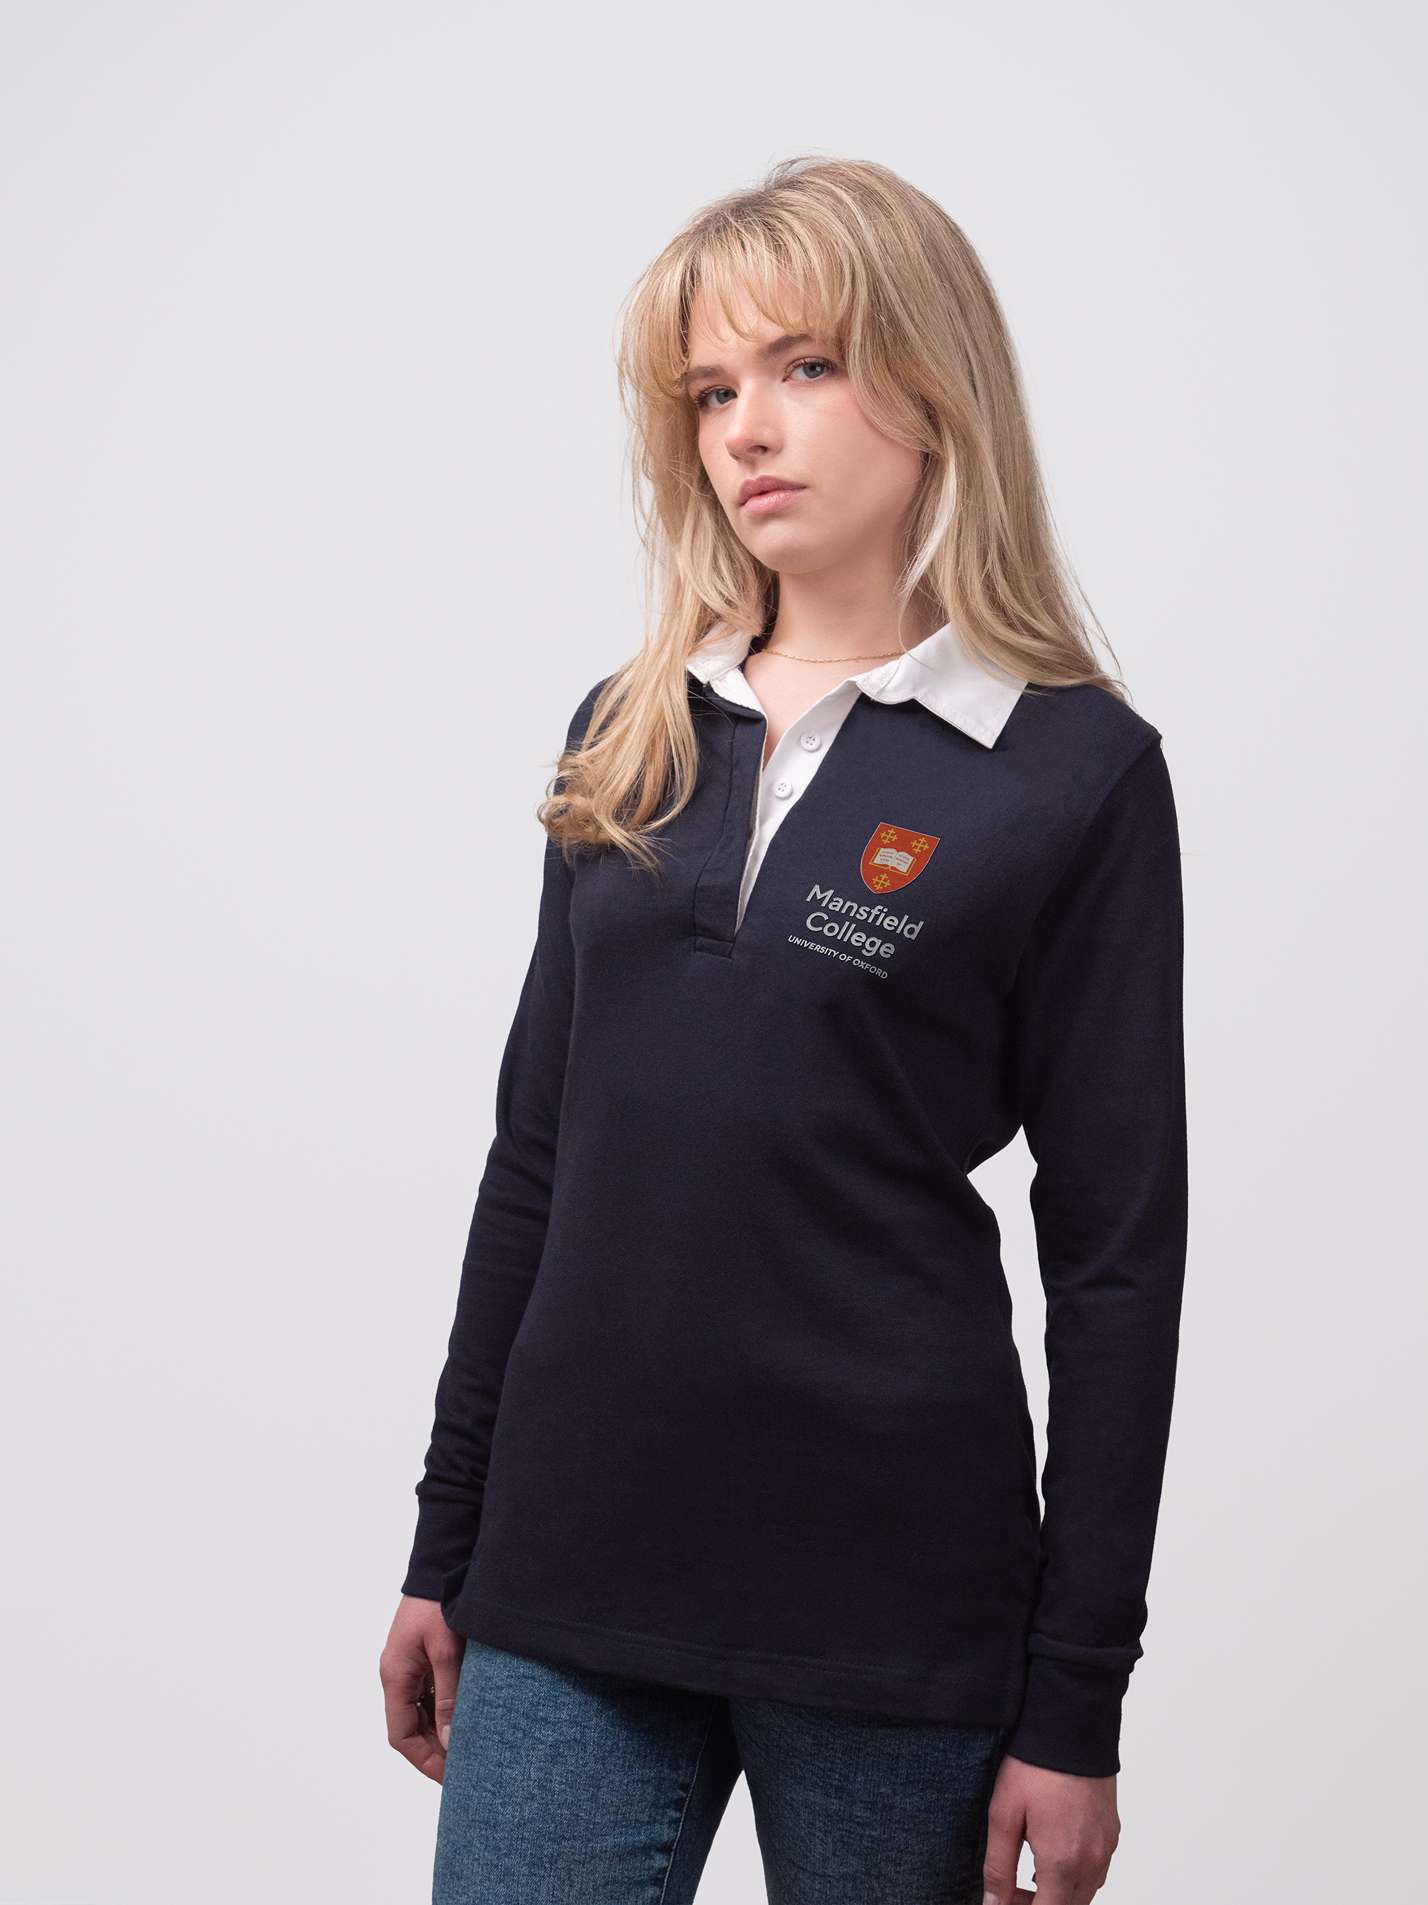 Mansfield College Oxford Classic Ladies Rugby Shirt